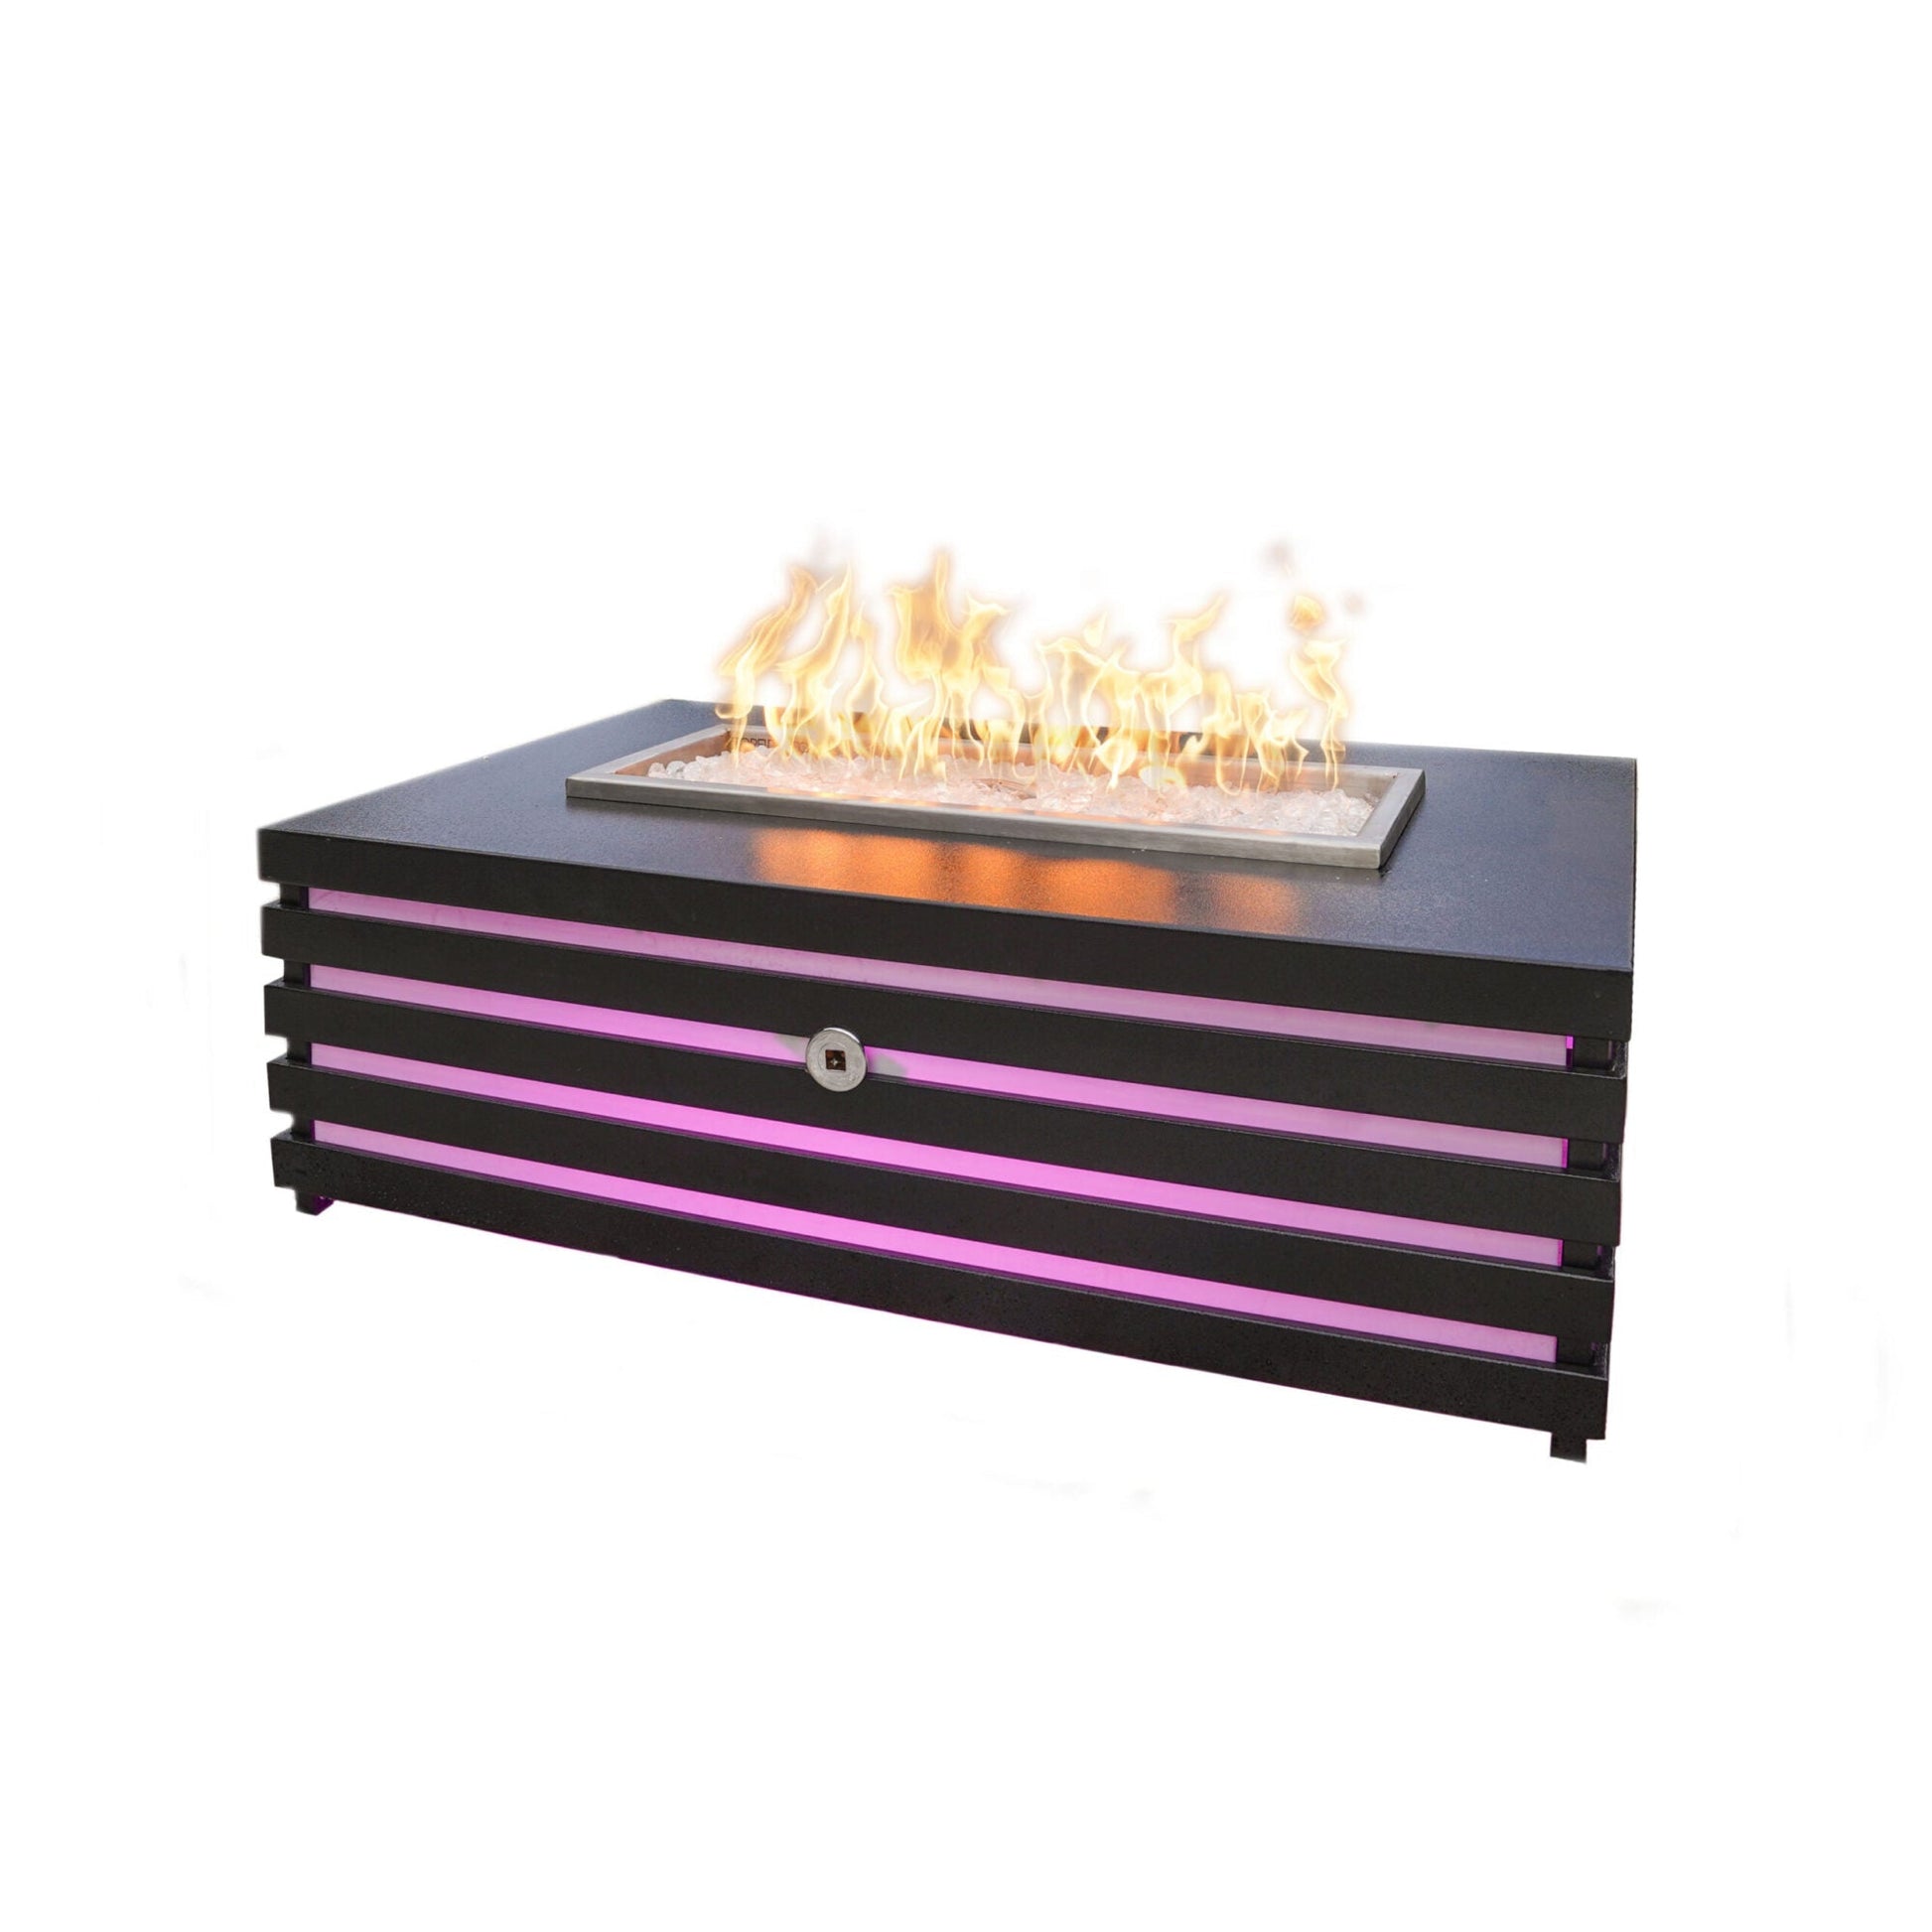 The Outdoor Plus Amina 72" Black Powder Coated Natural Gas Fire Pit with 110V Electronic Ignition